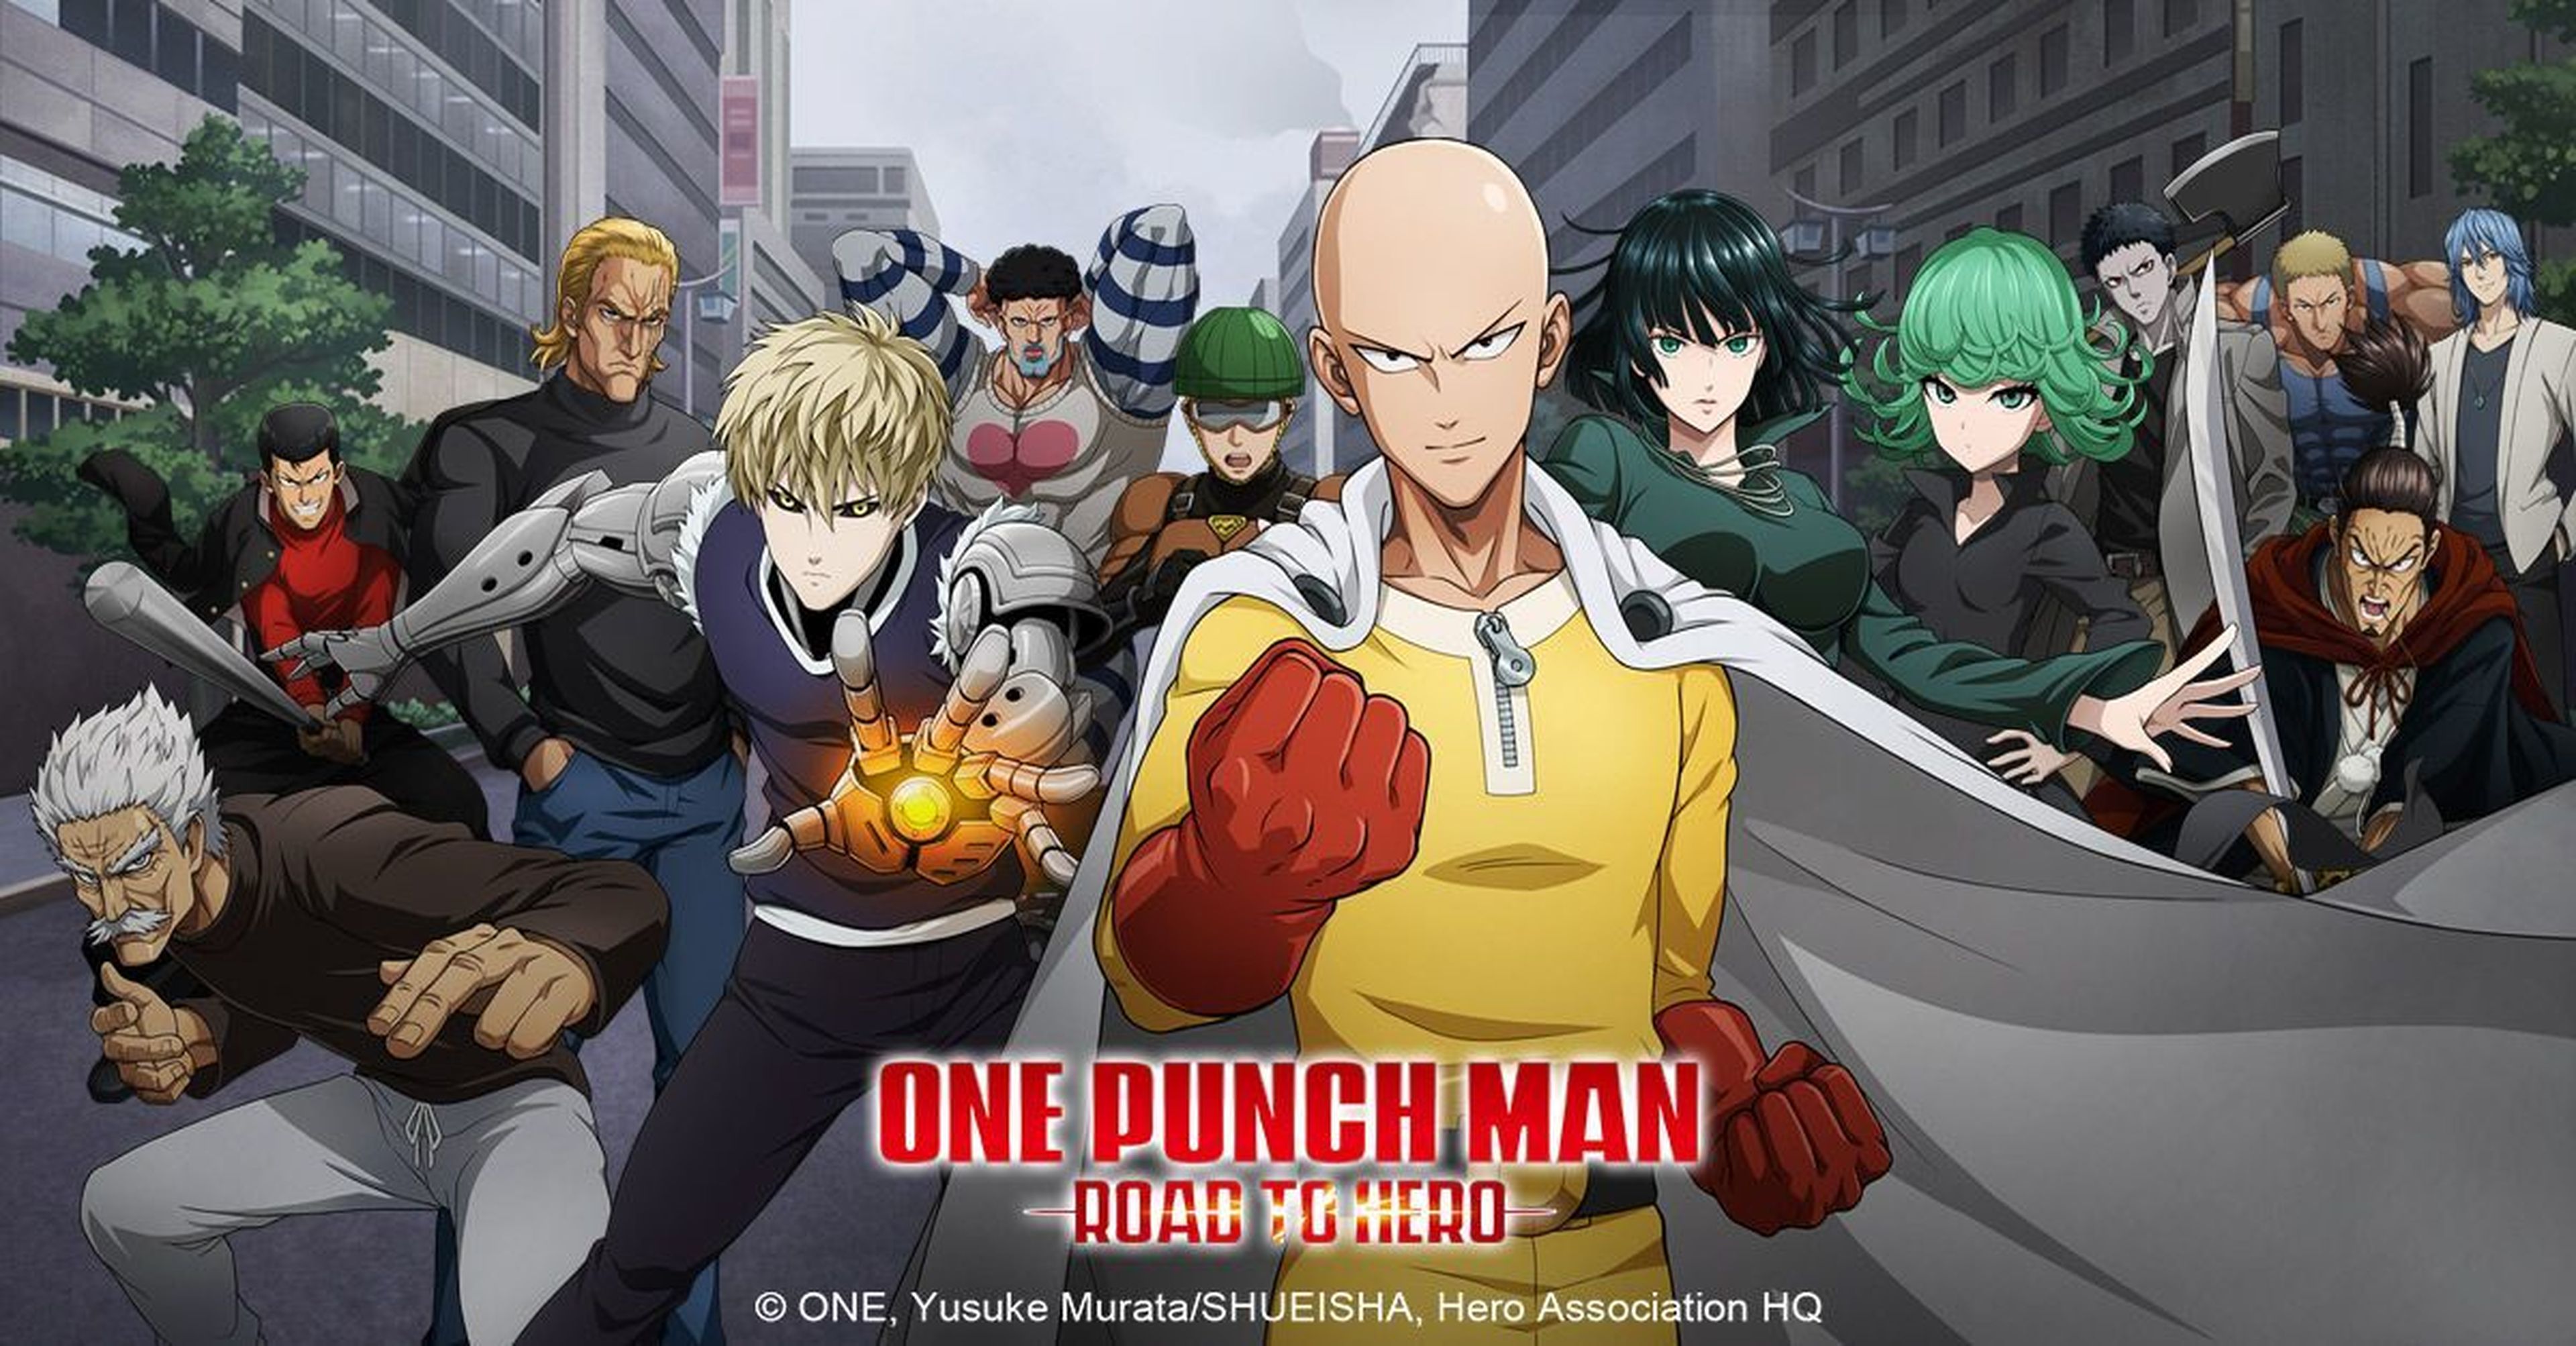 One Punch Man Road to Hero